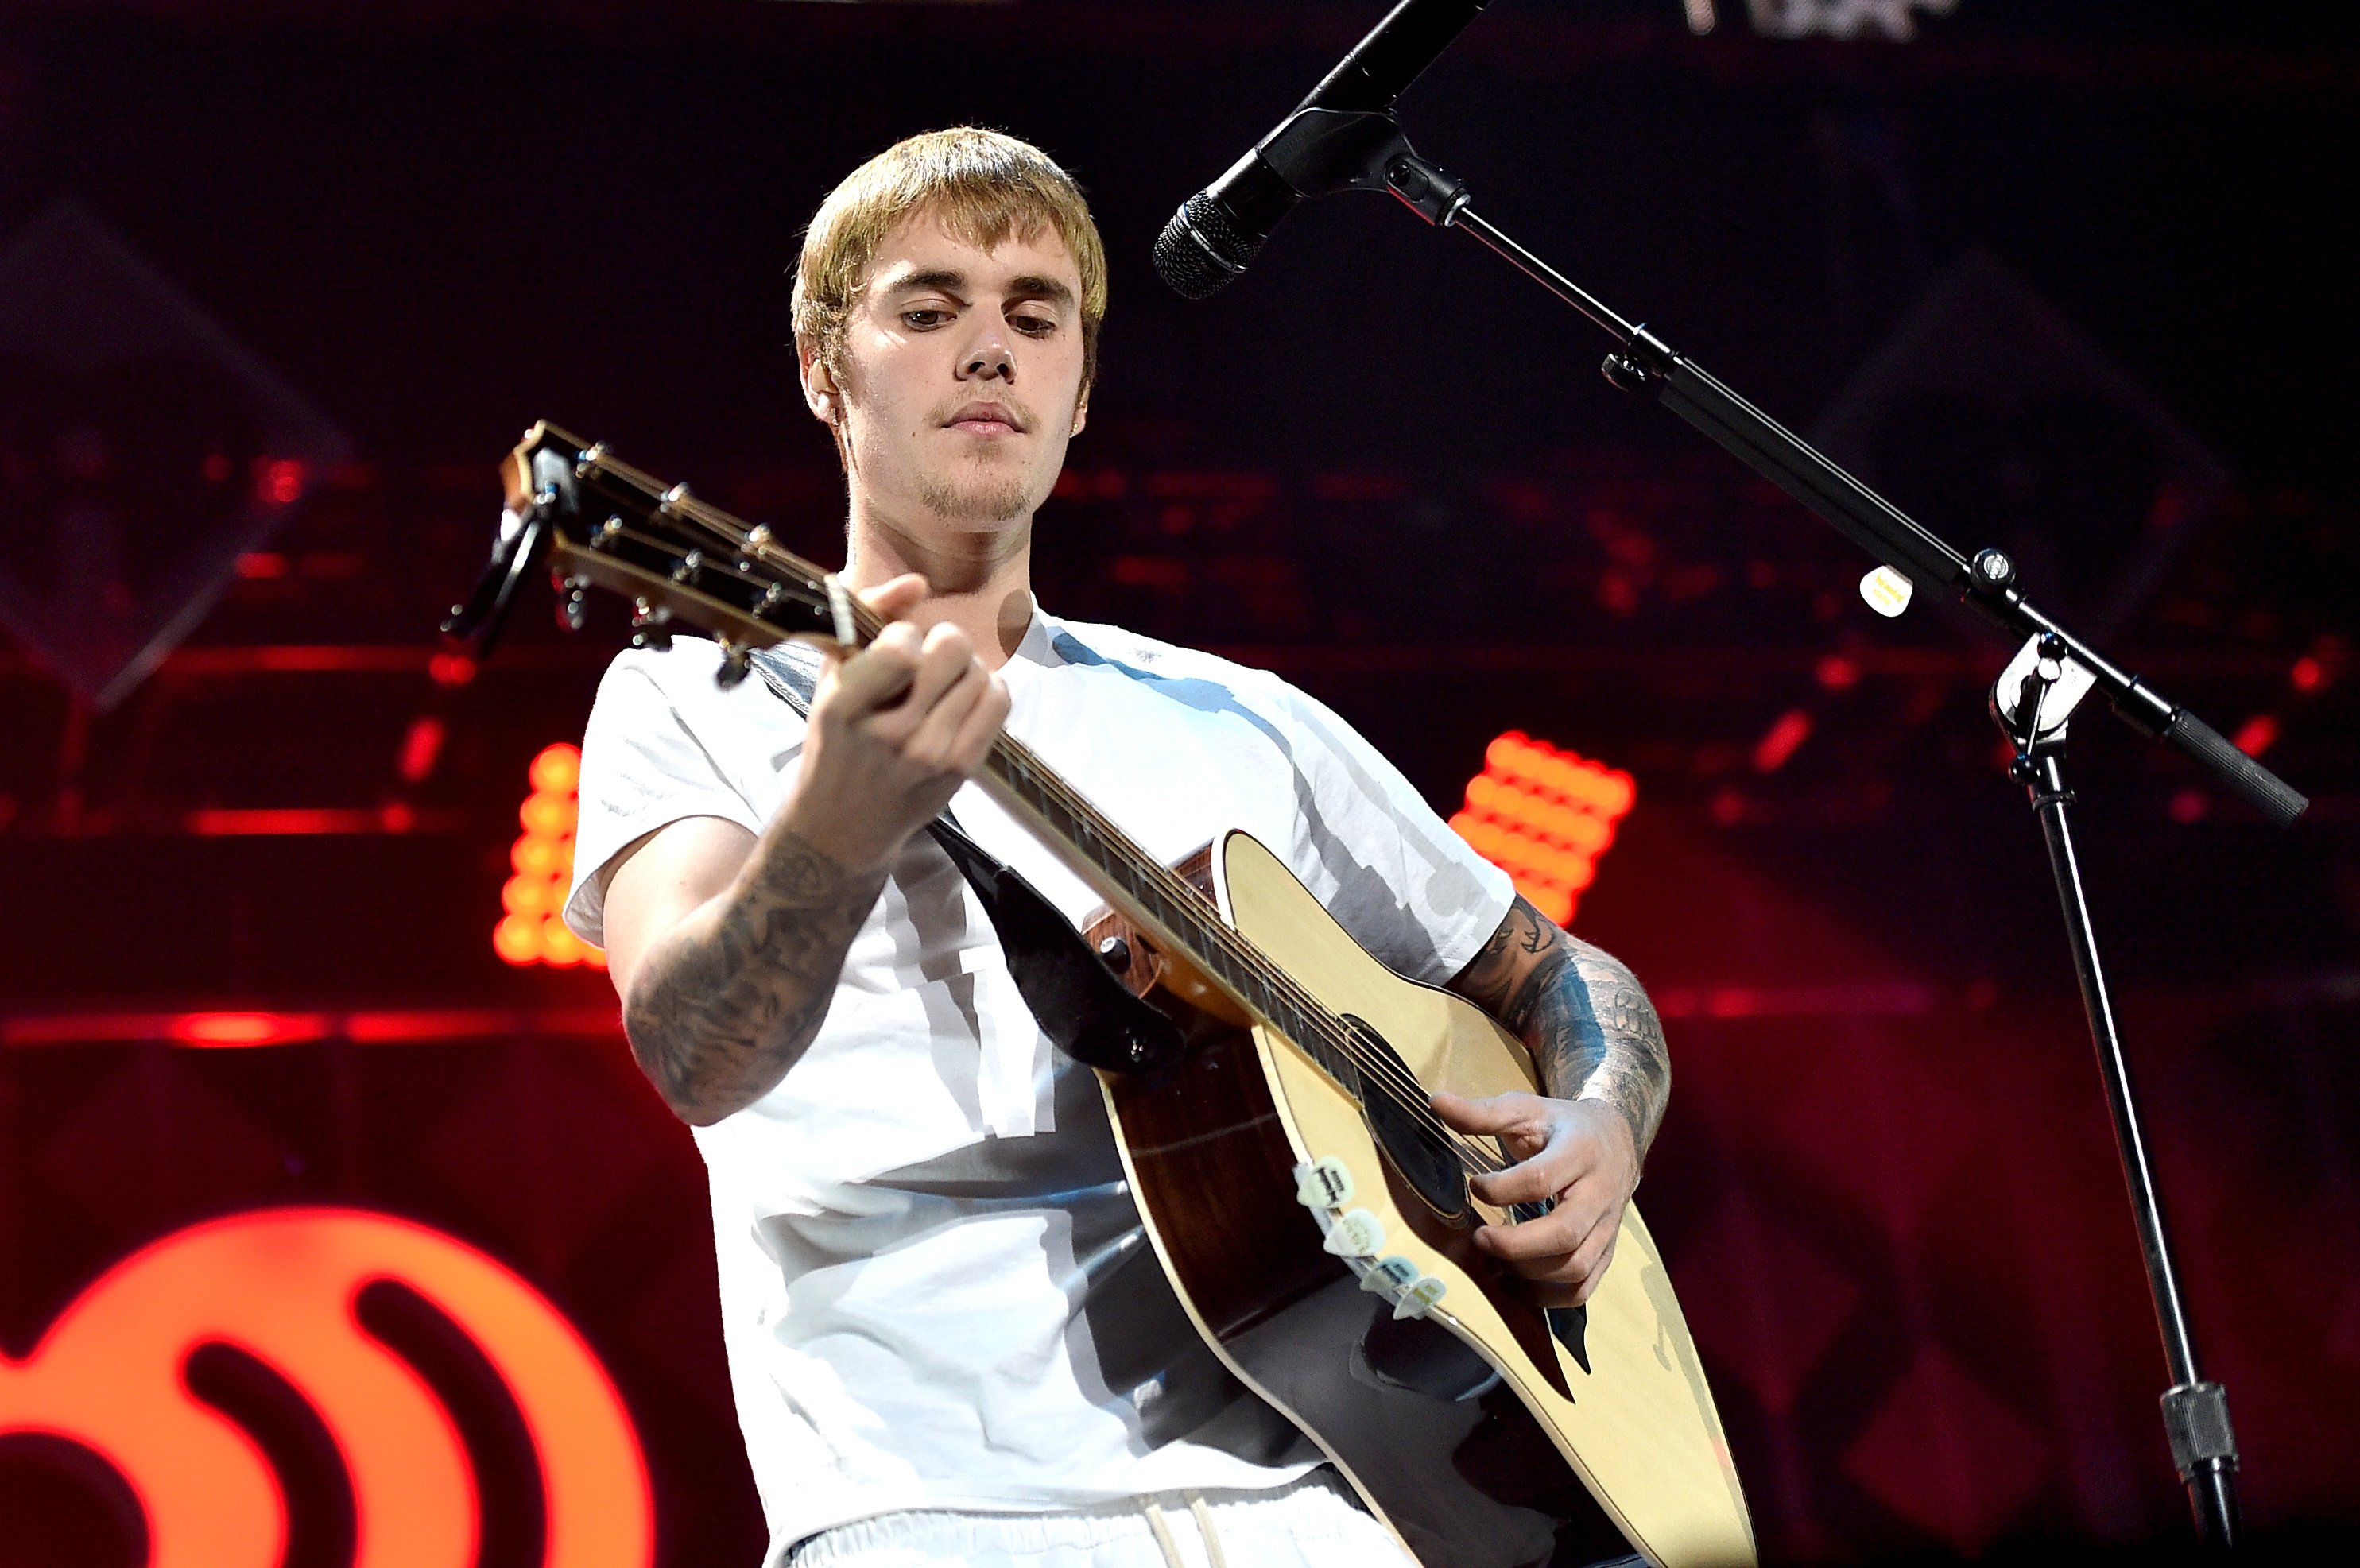 Justin Bieber performs onstage during 102.7 KIIS FM's Jingle Ball 2016 presented by Capital One at Staples Center on December 2, 2016 in Los Angeles